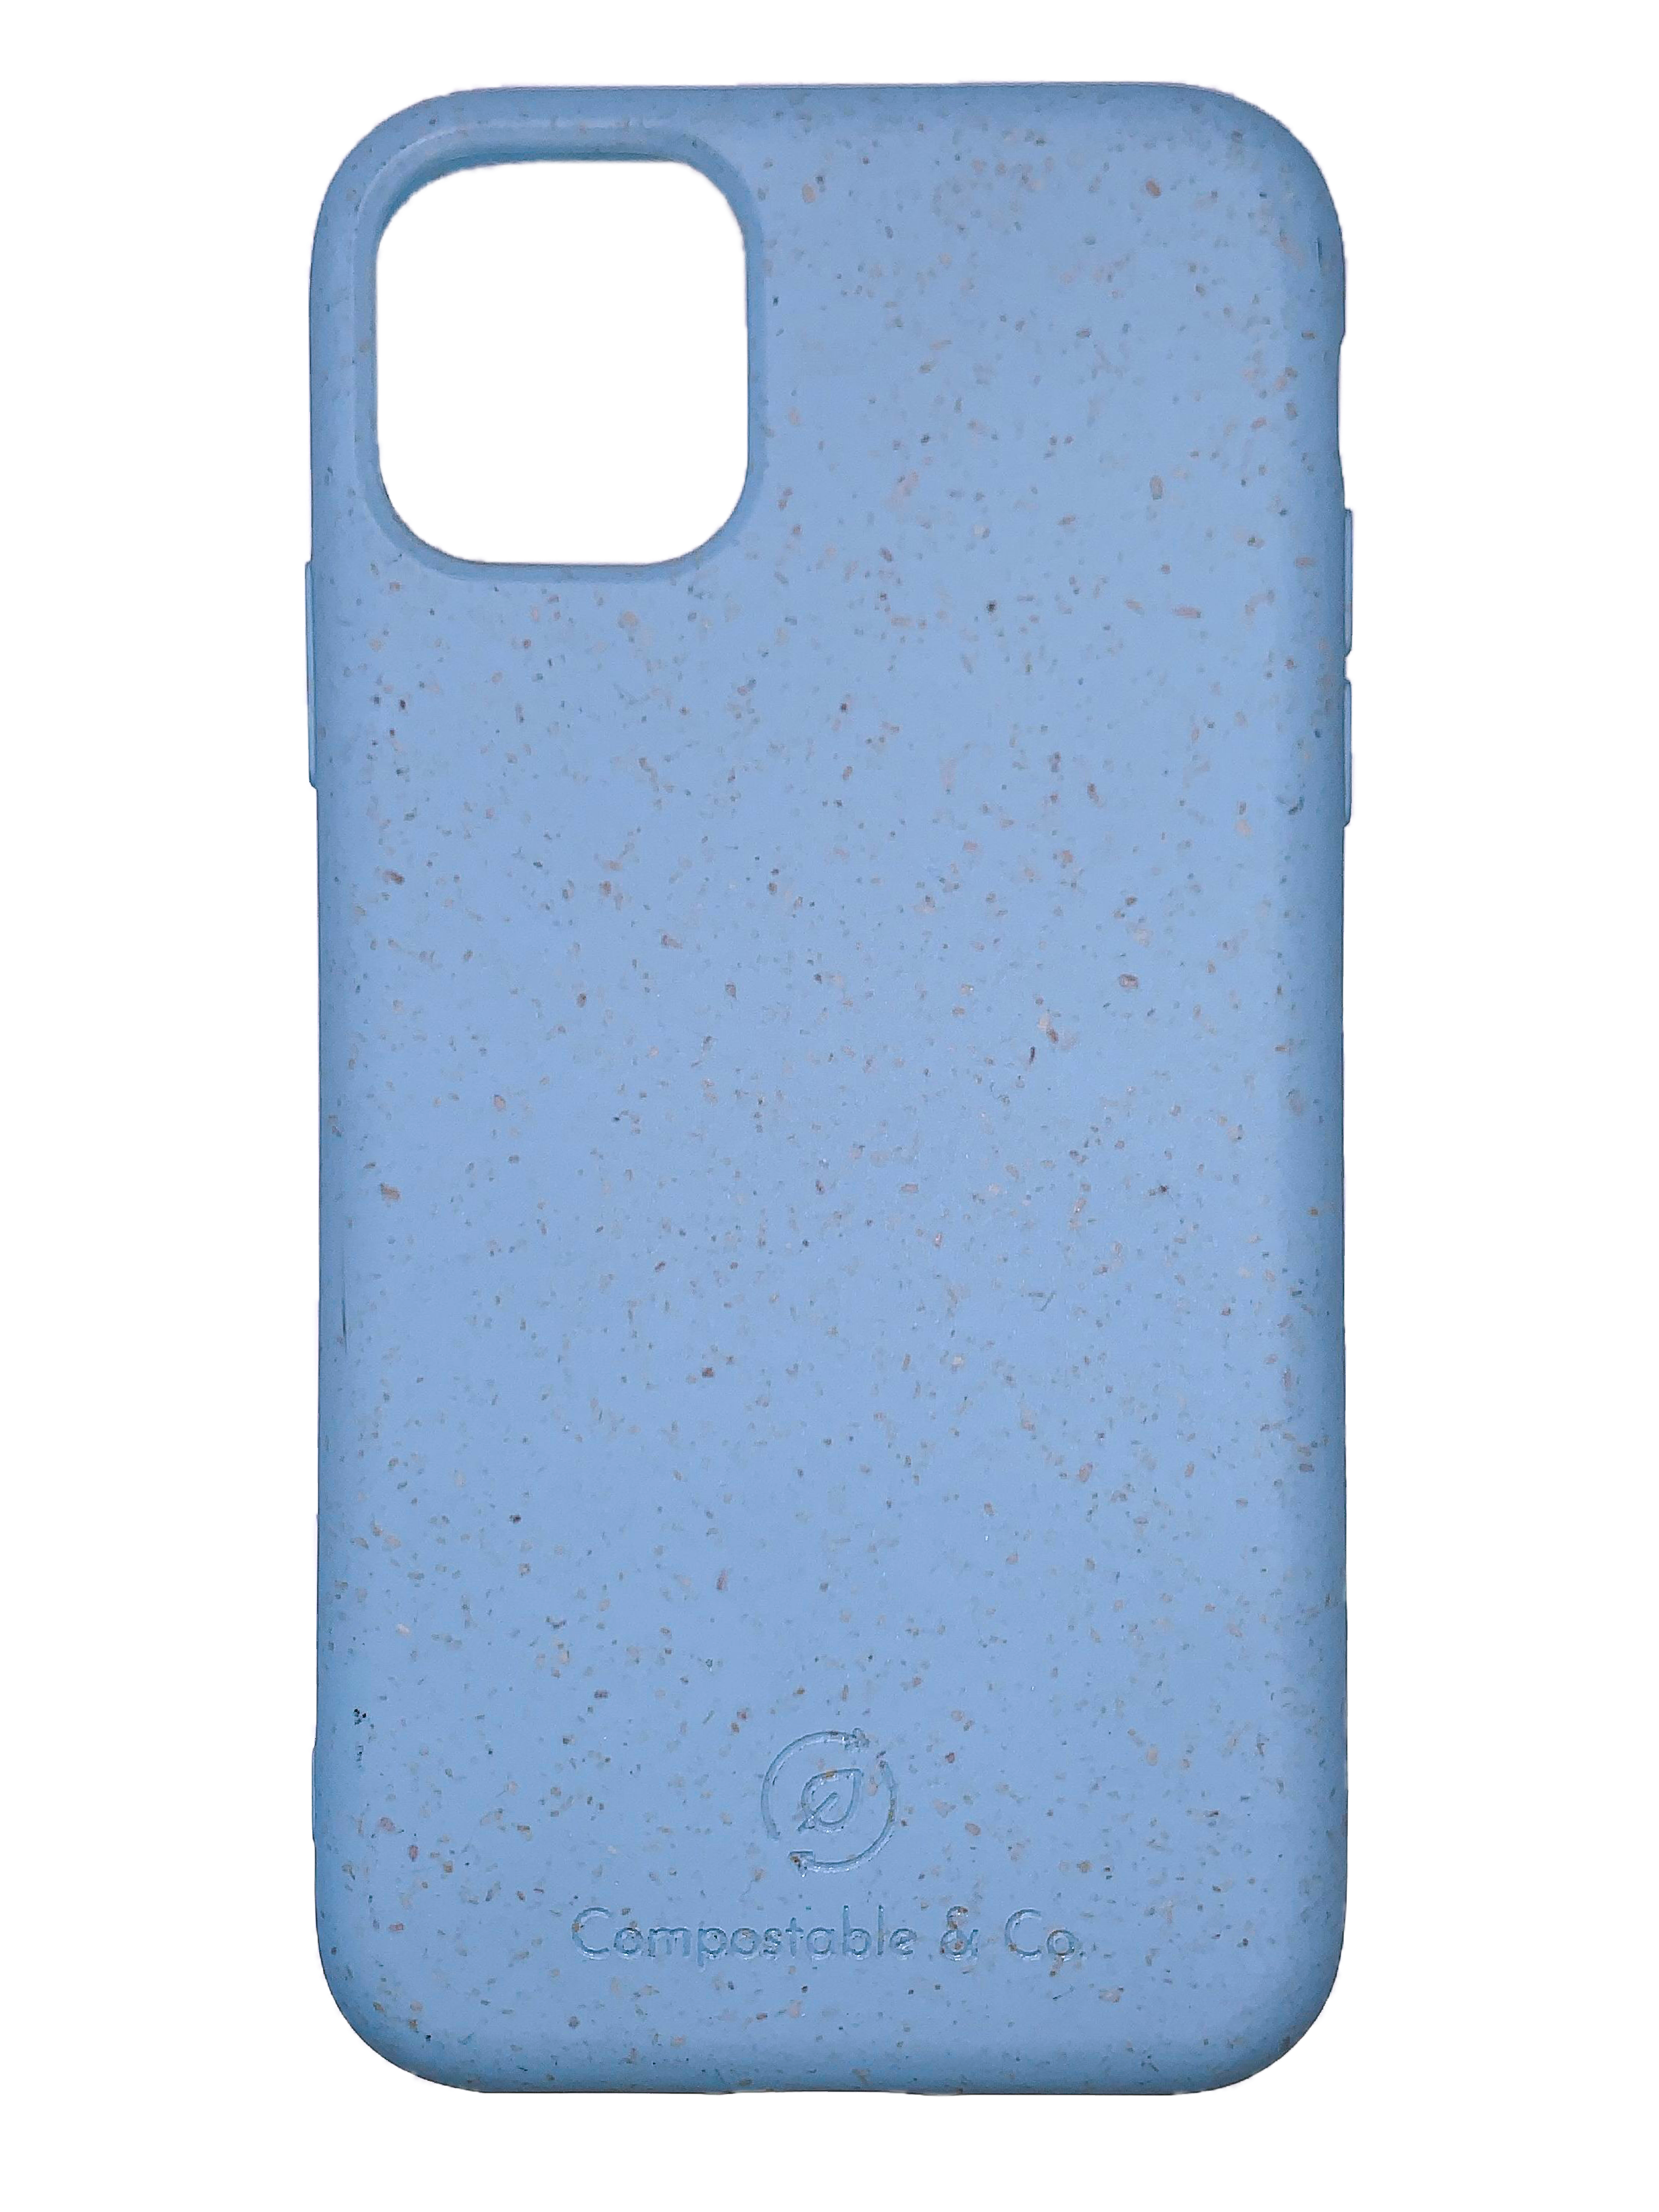 Compostable & Co. iPhone 12 pro max blue biodegradable phone case